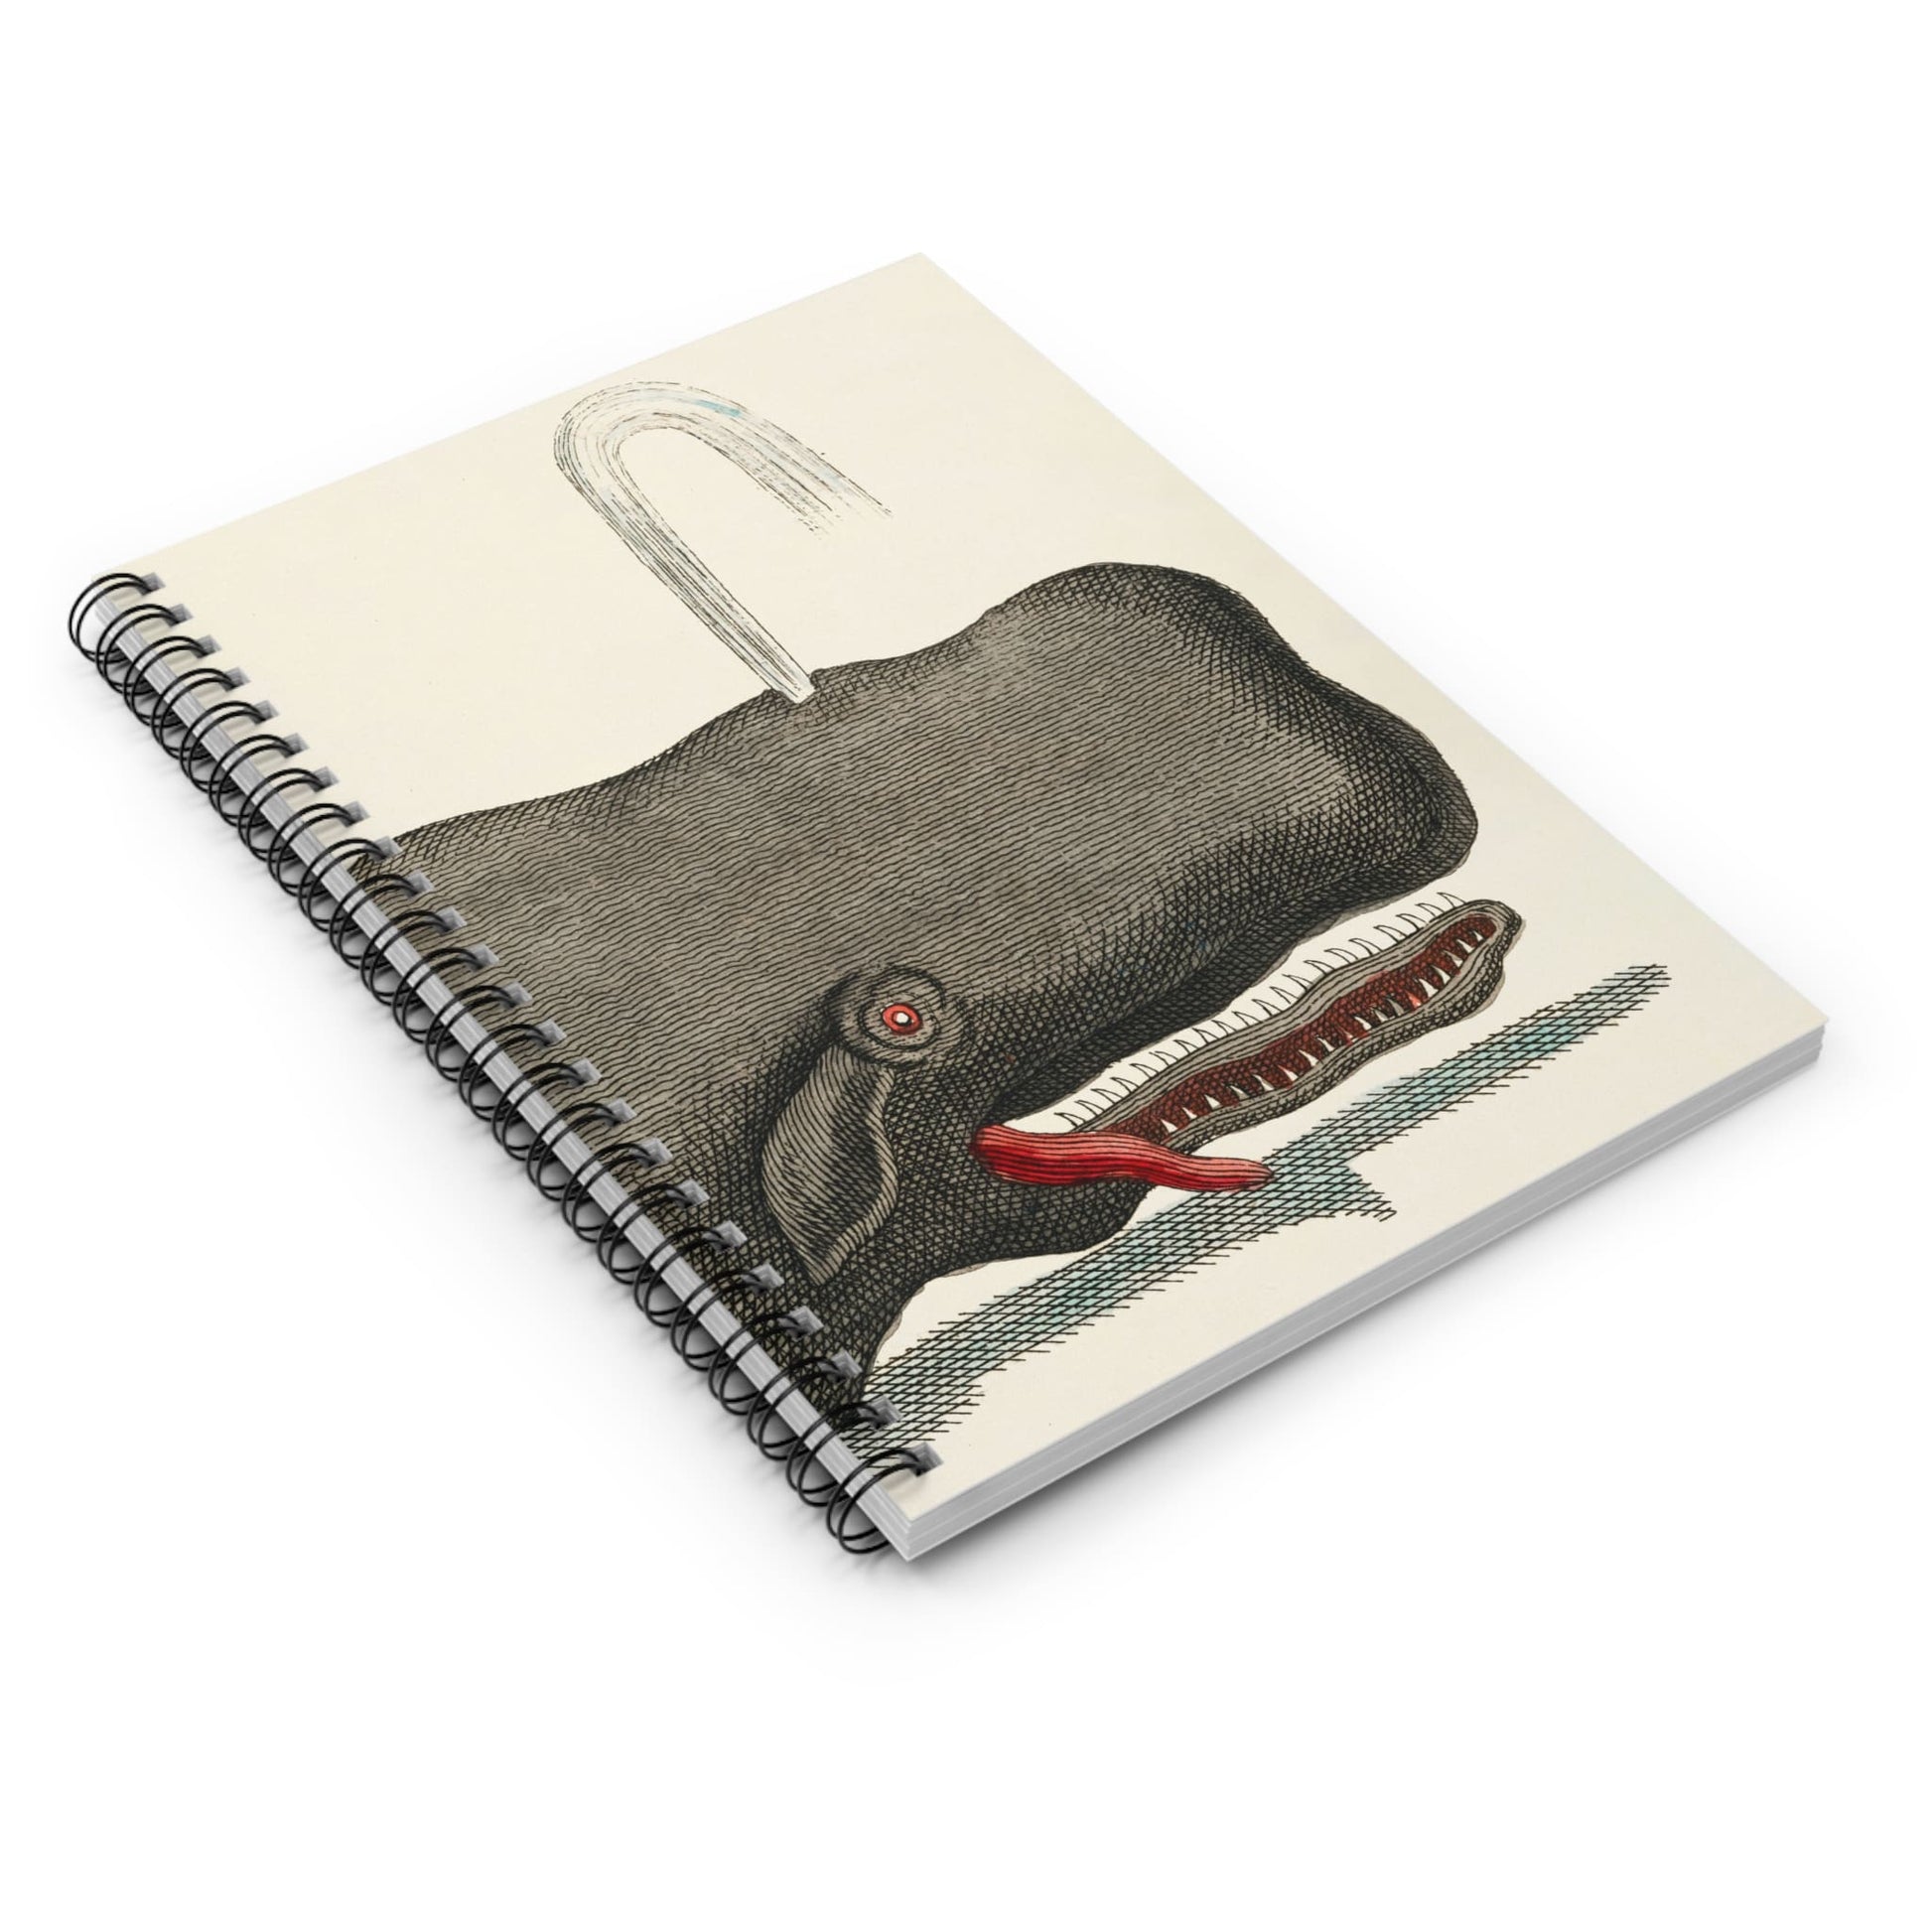 Funny Whale Spiral Notebook Laying Flat on White Surface